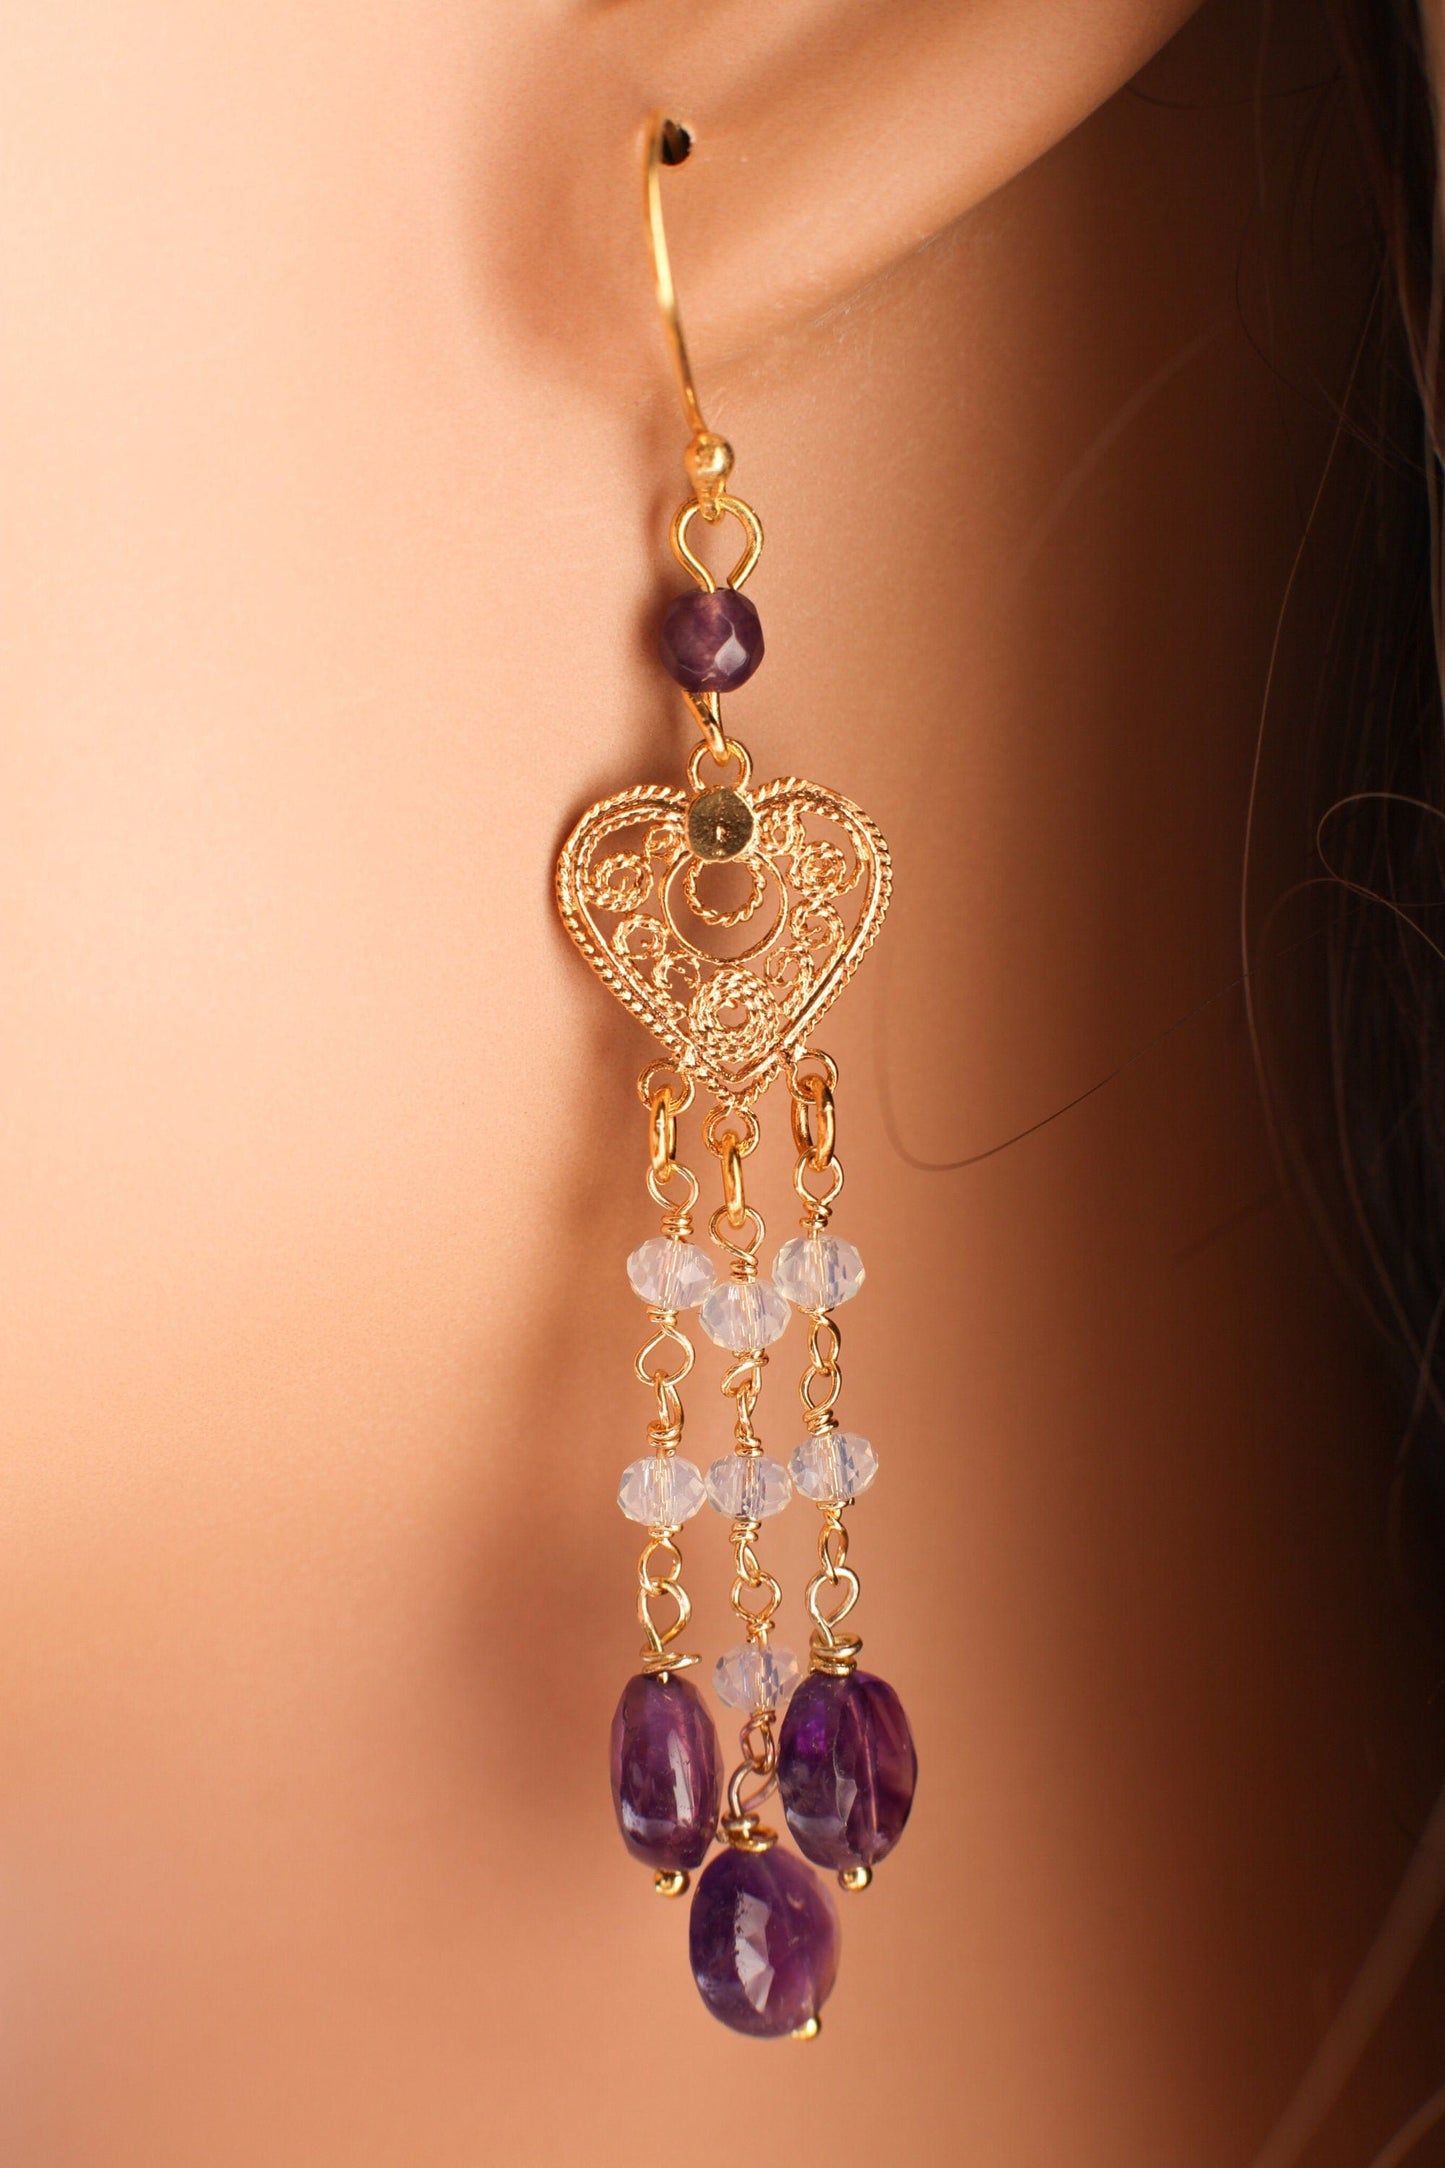 Natural Amethyst dangling Filigree Chandelier Heart,Faceted Opalite Spacers wire wrapped Gold Earrings, Handmade Gift for Her,